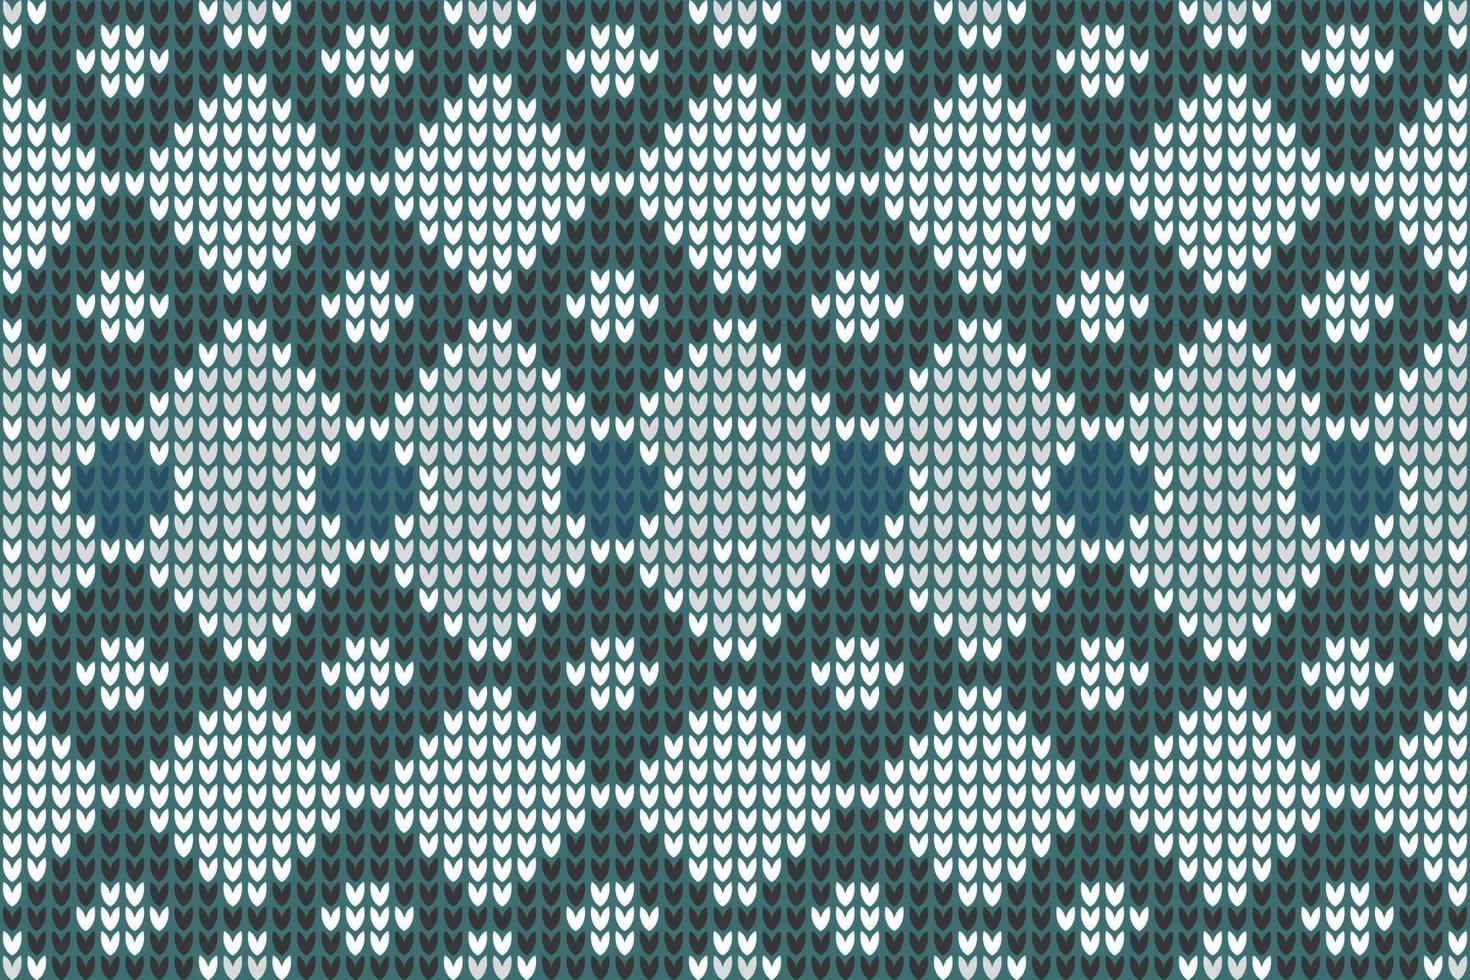 knit dress fair isle pattern background for fashion textiles, knitwear and graphics. vector